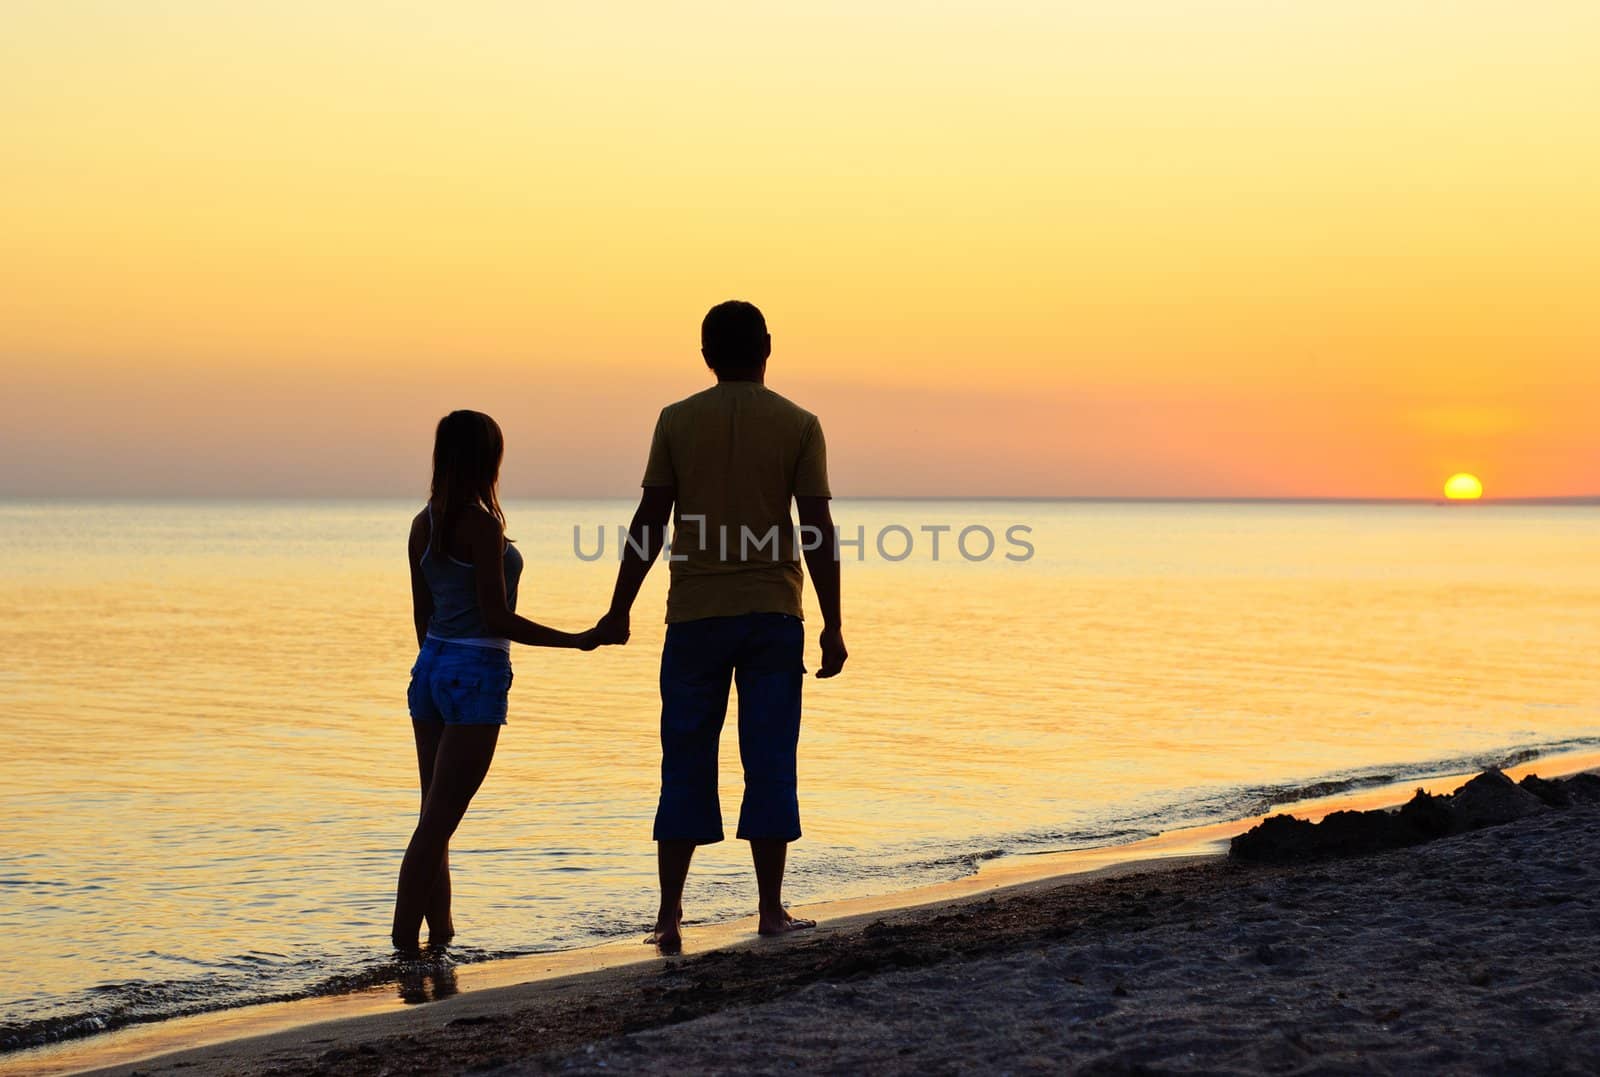 Couple silhouette on the beach by olegator1977